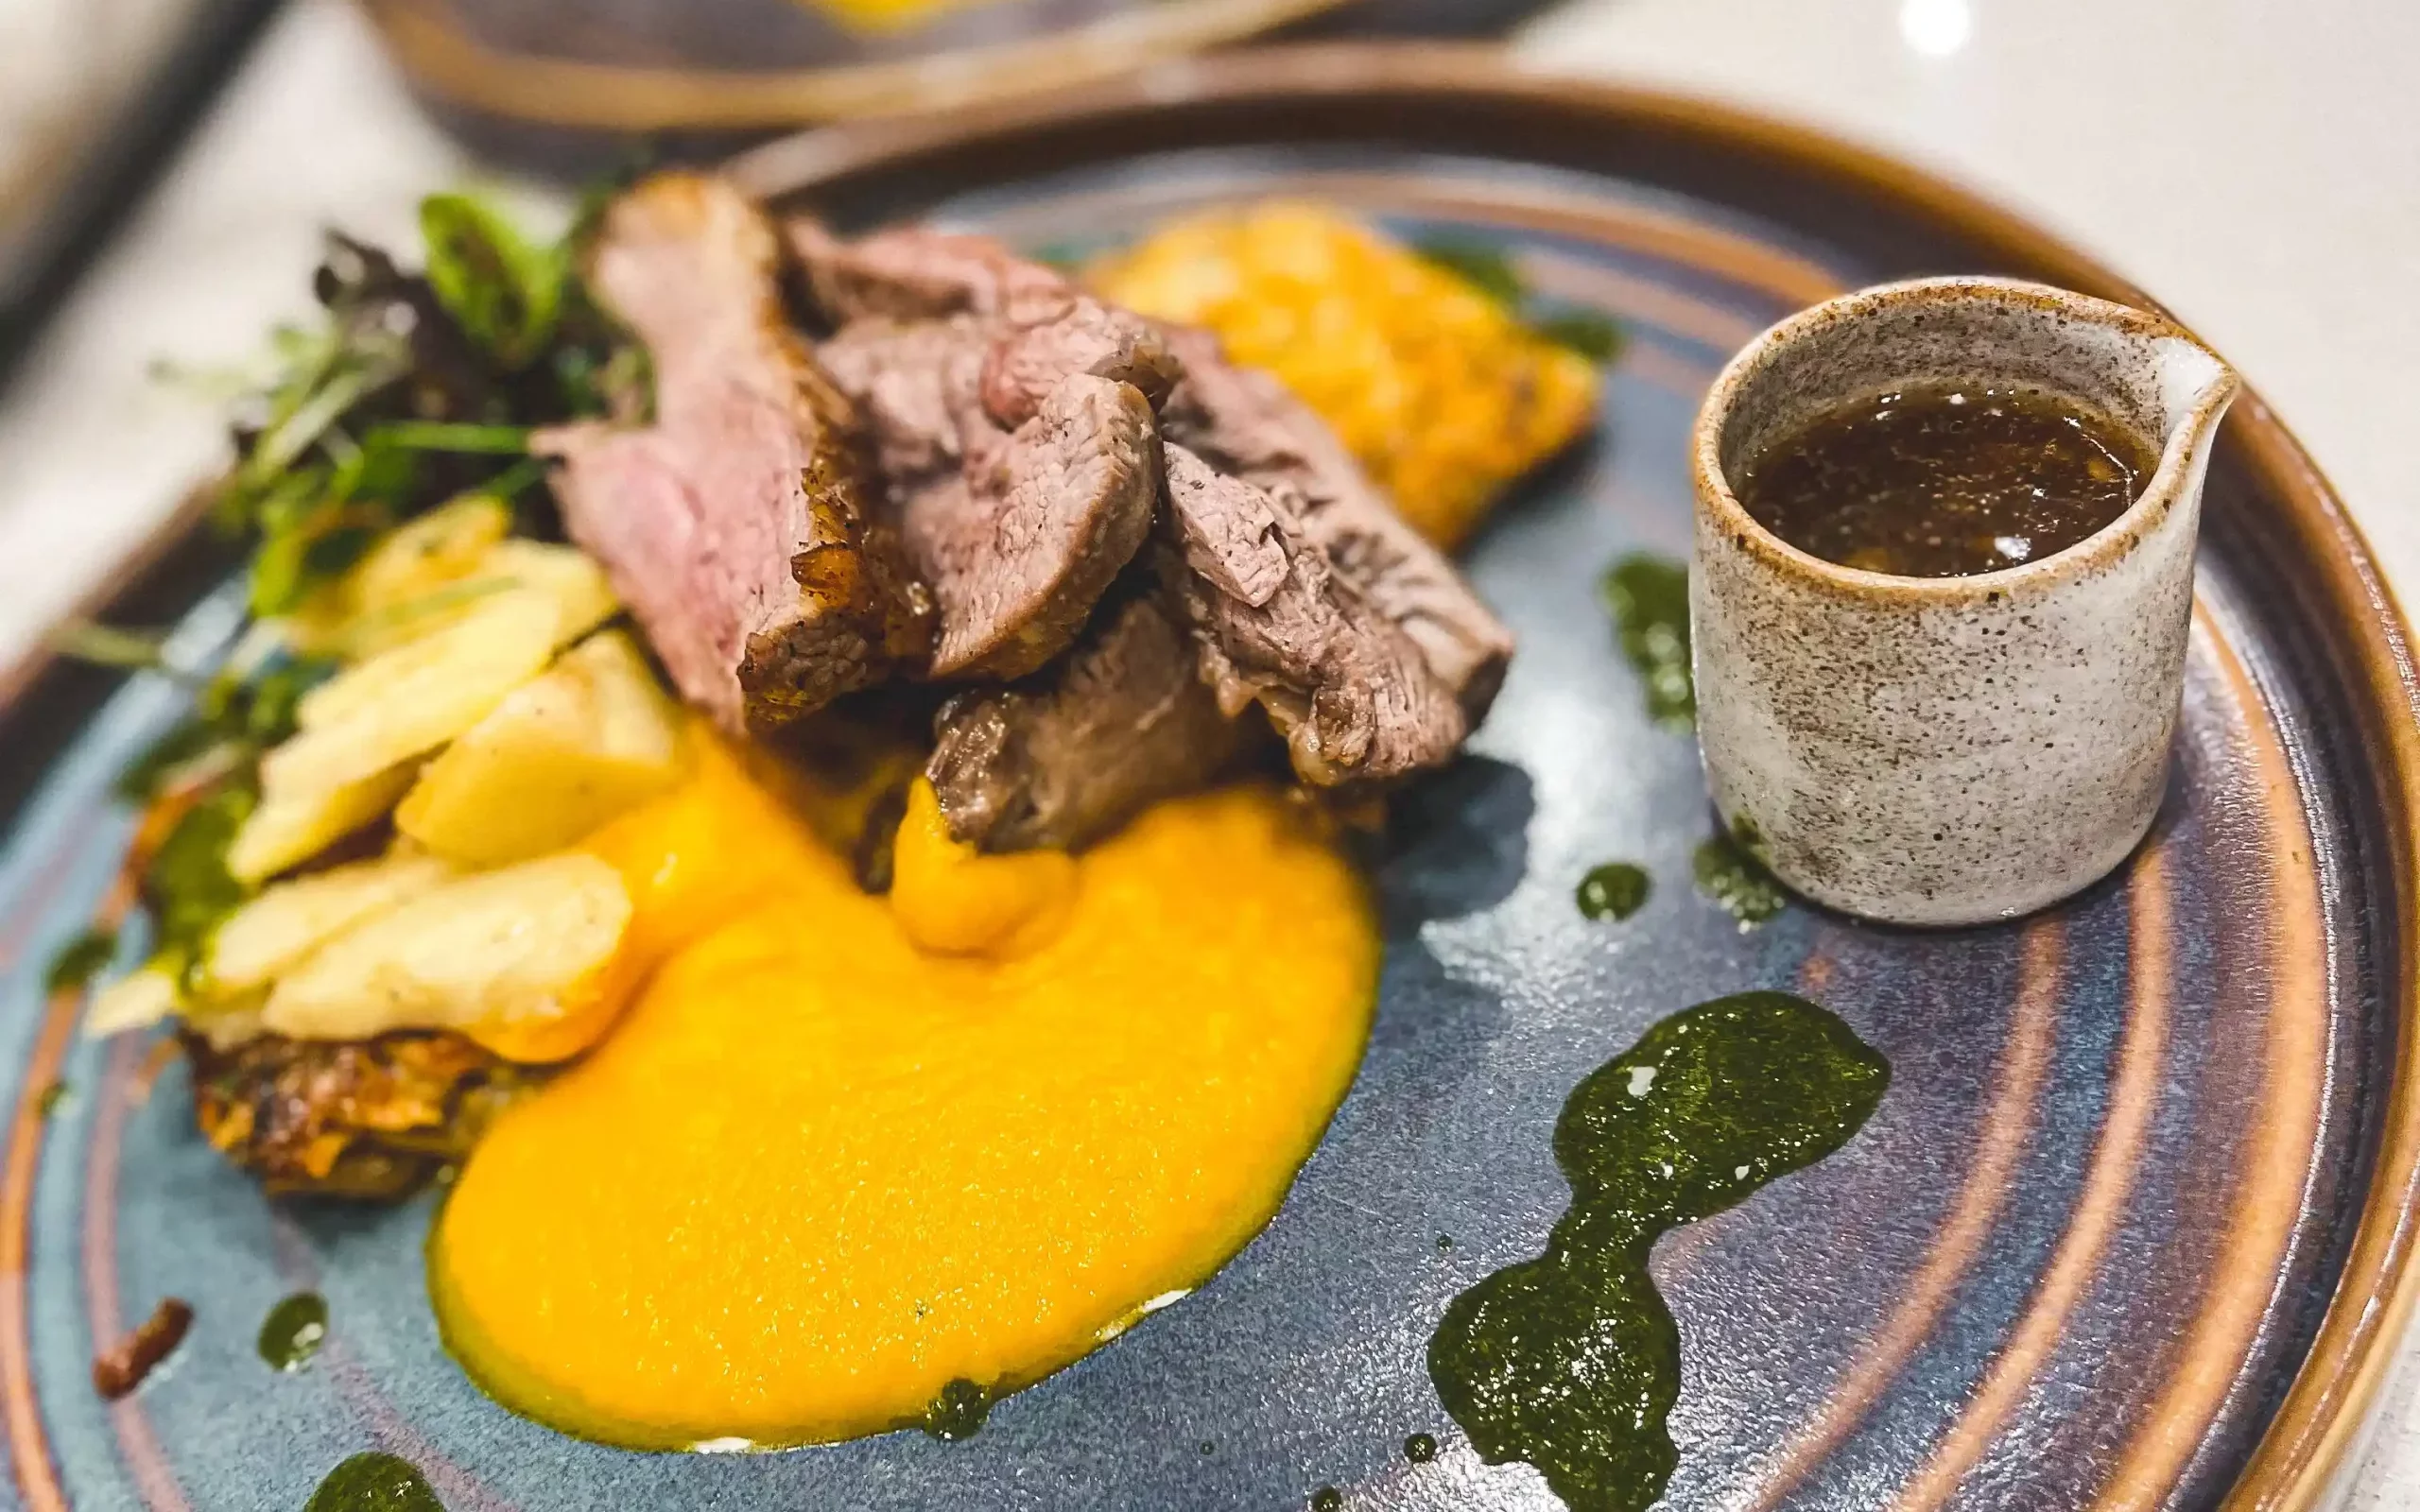 A main dish, created by private chef direct for one of their London dinner parties